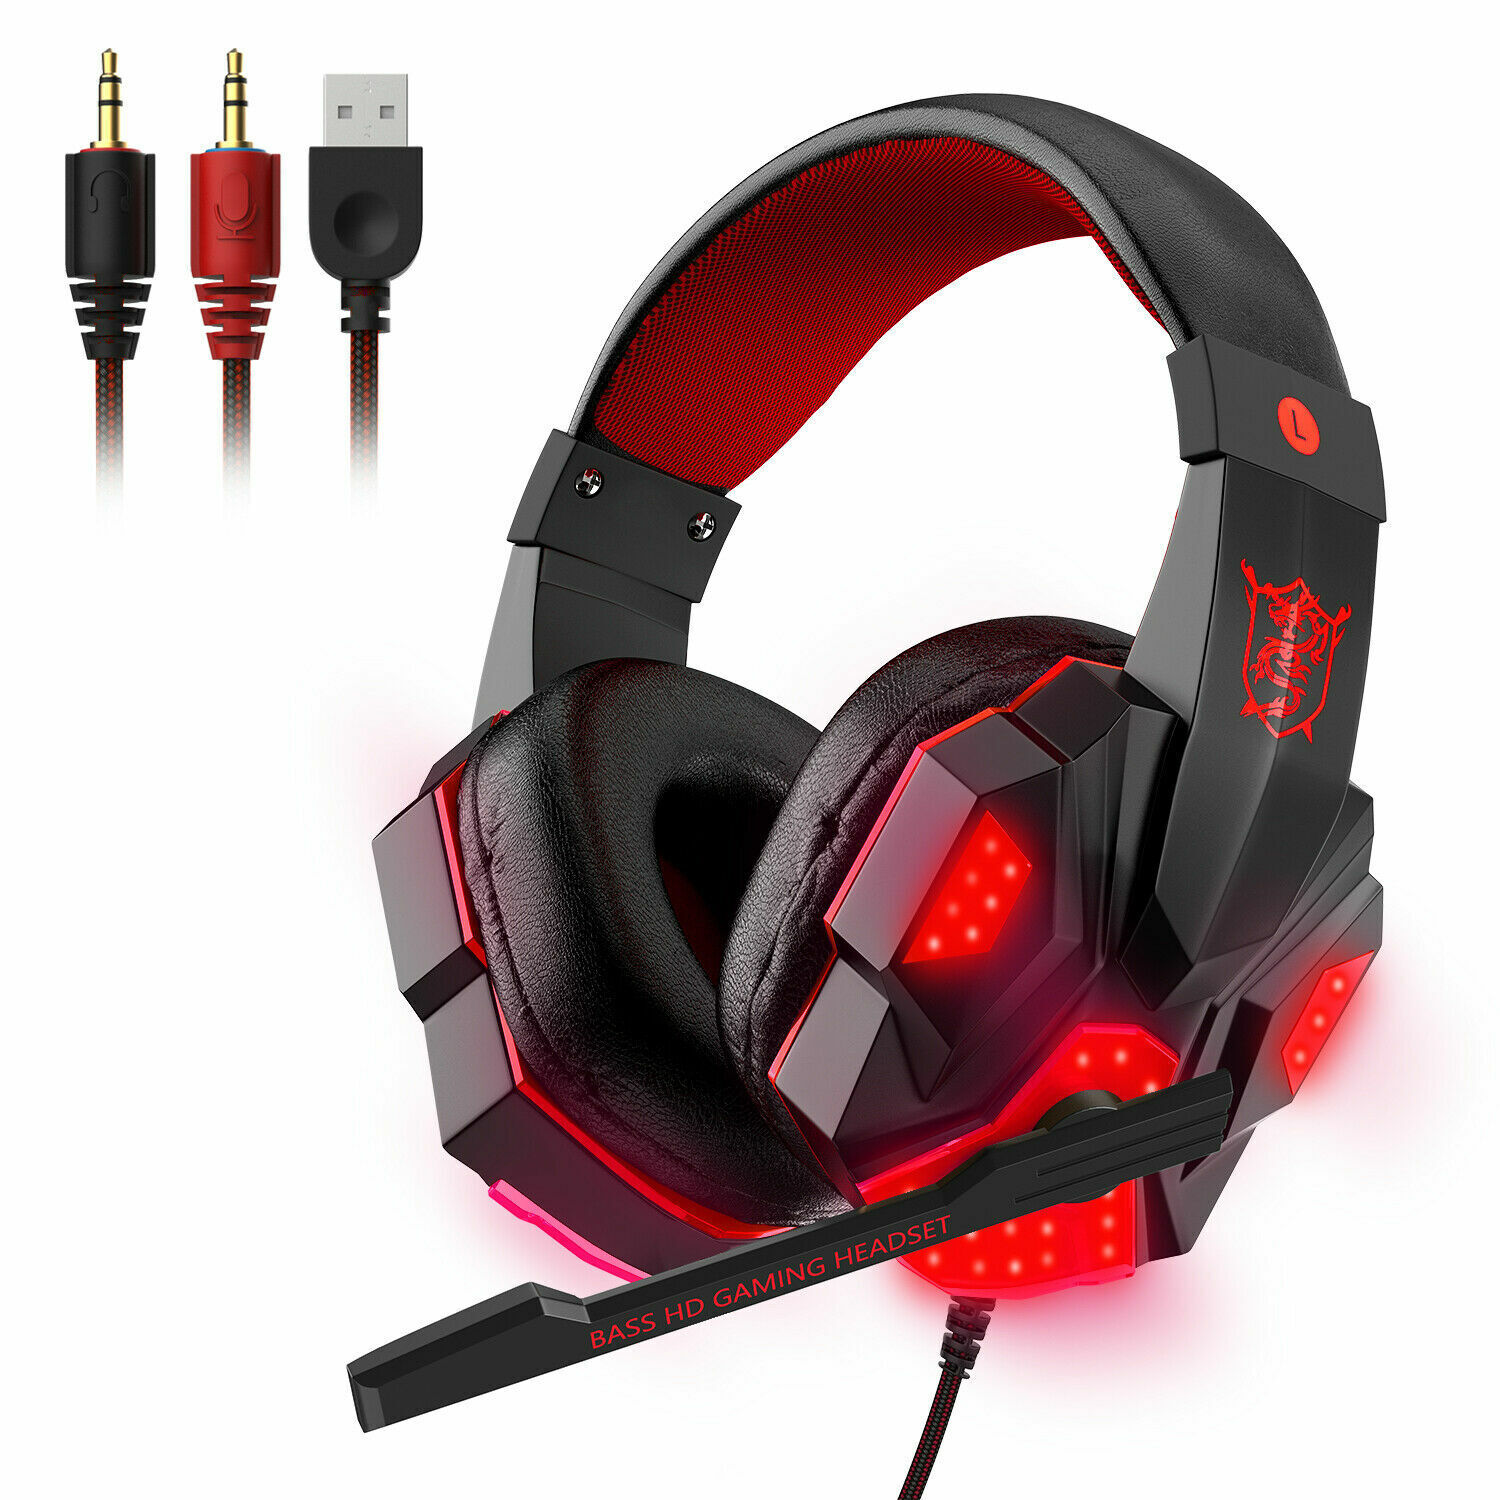 LED Surround Sound Gaming Headset for Consoles & PC